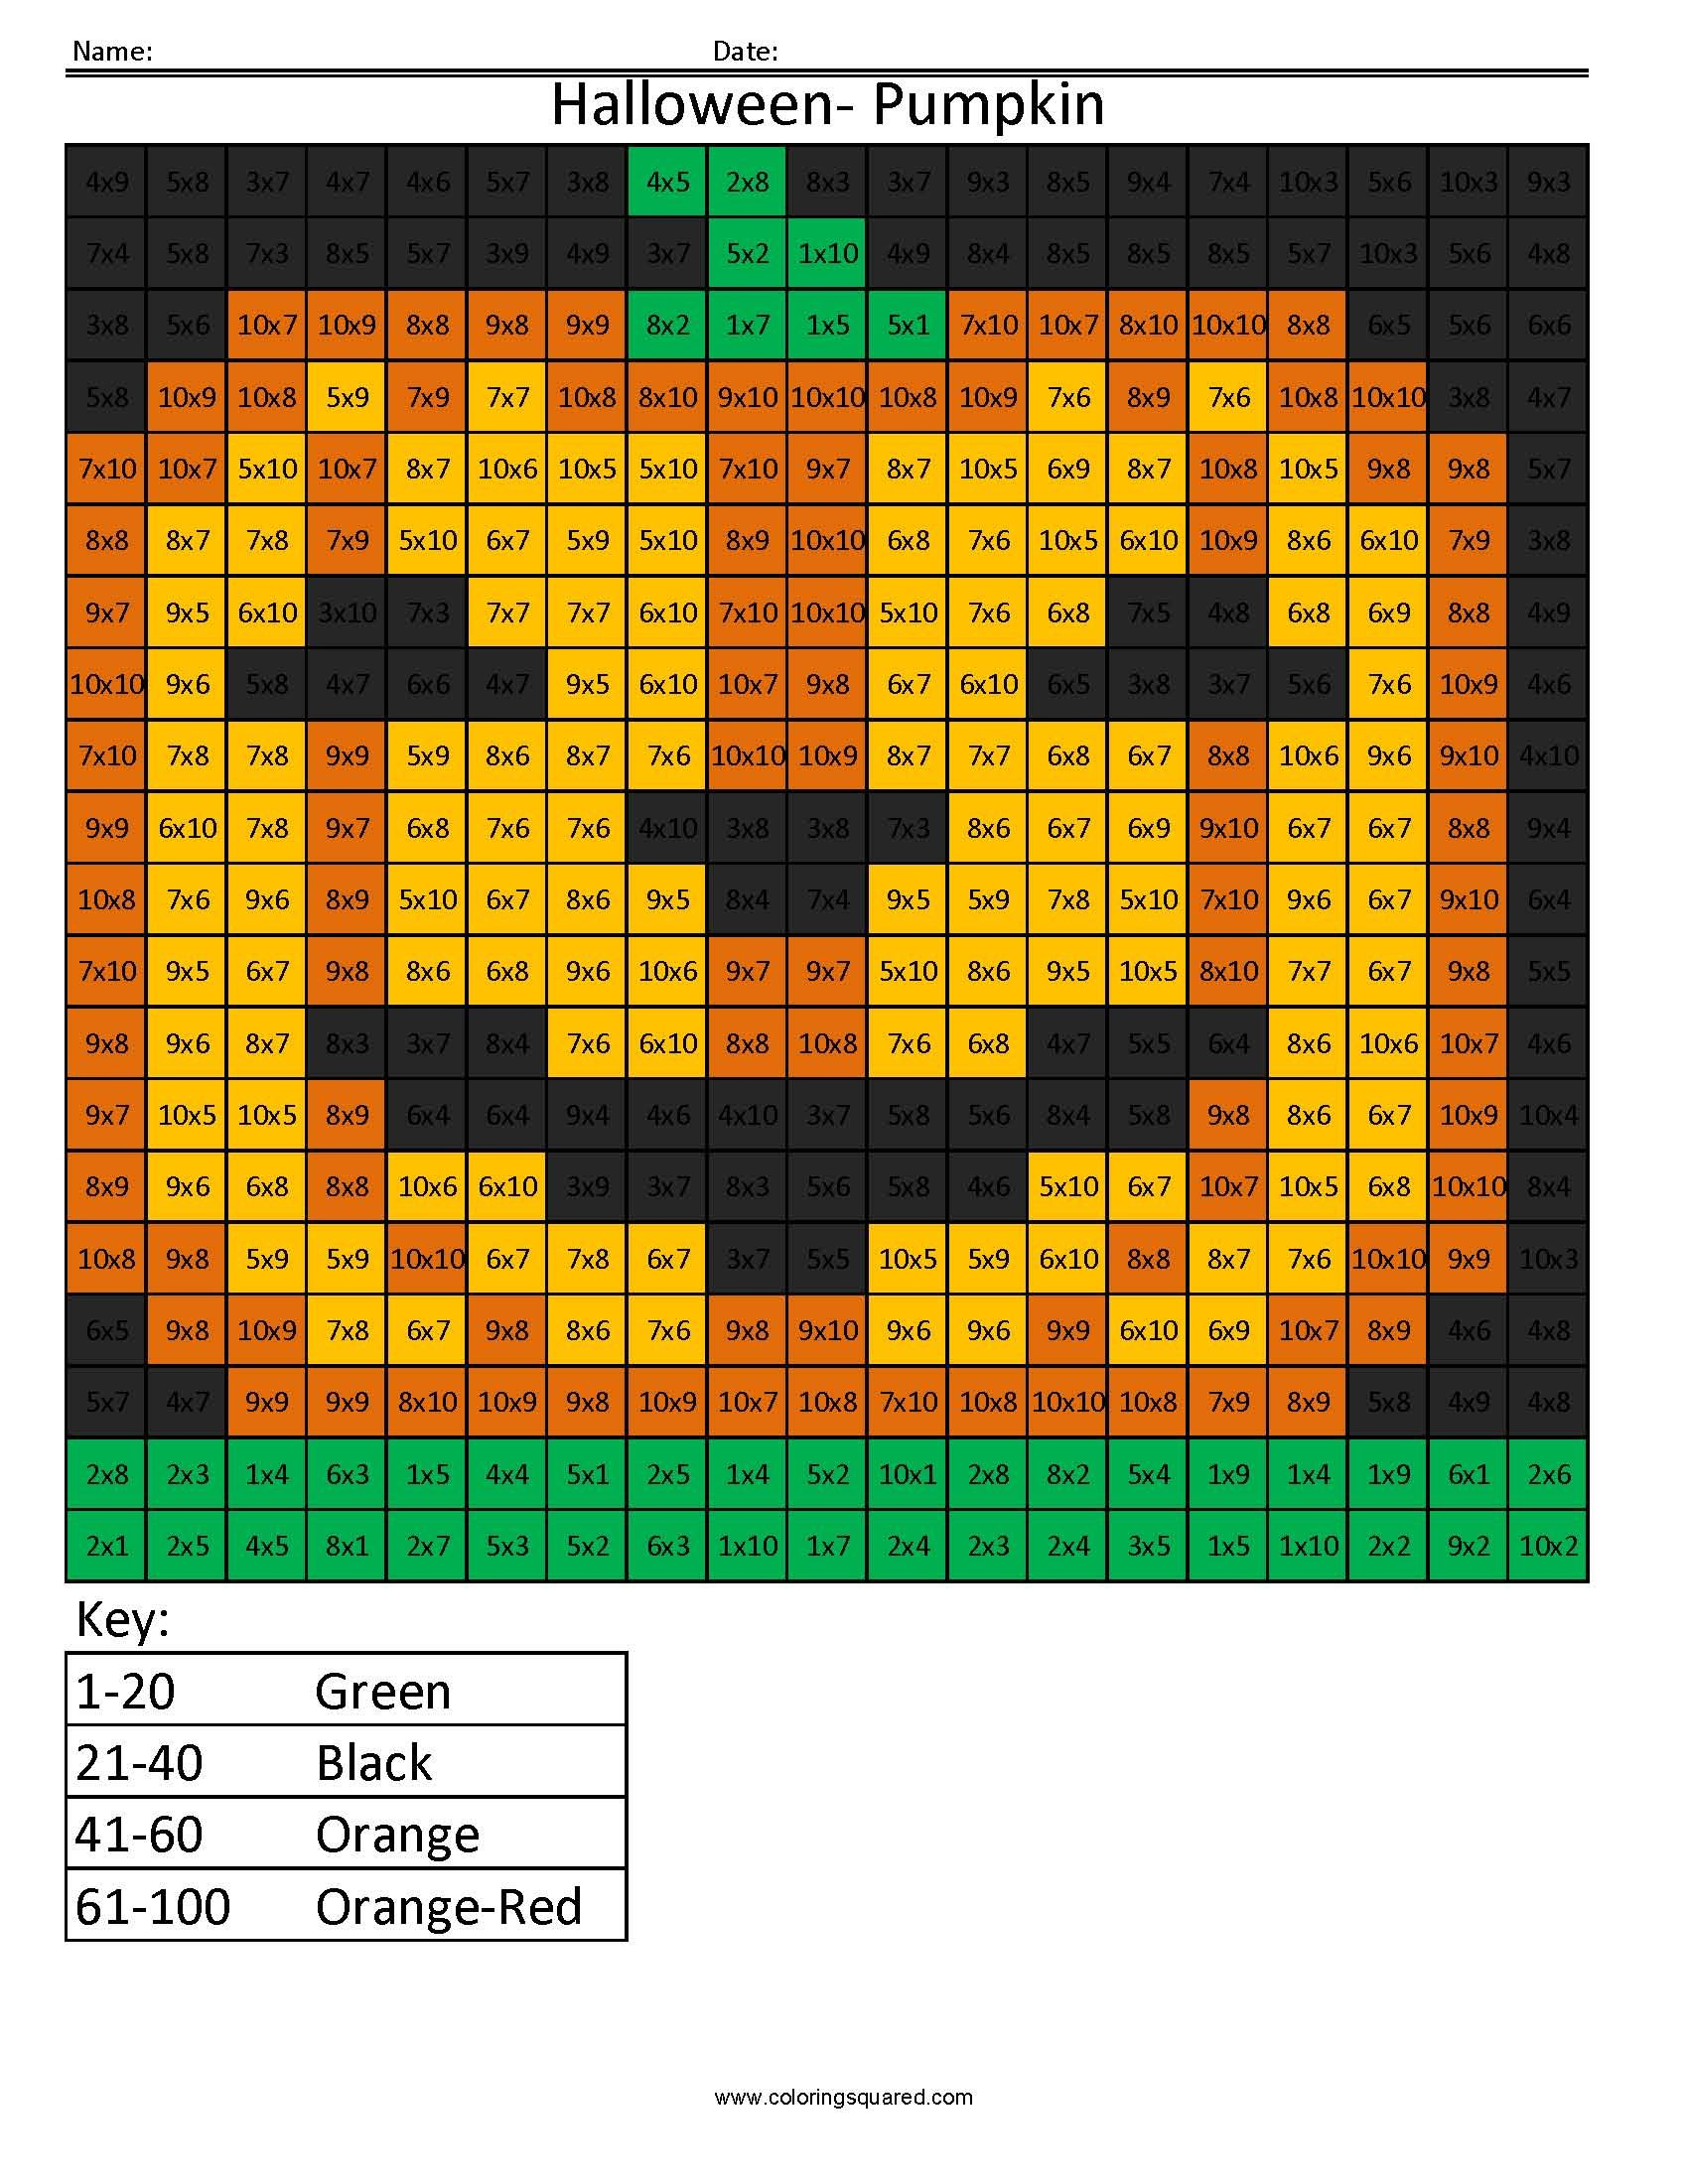 Halloween Pumpkin- Holiday Multiplication - Coloring Squared